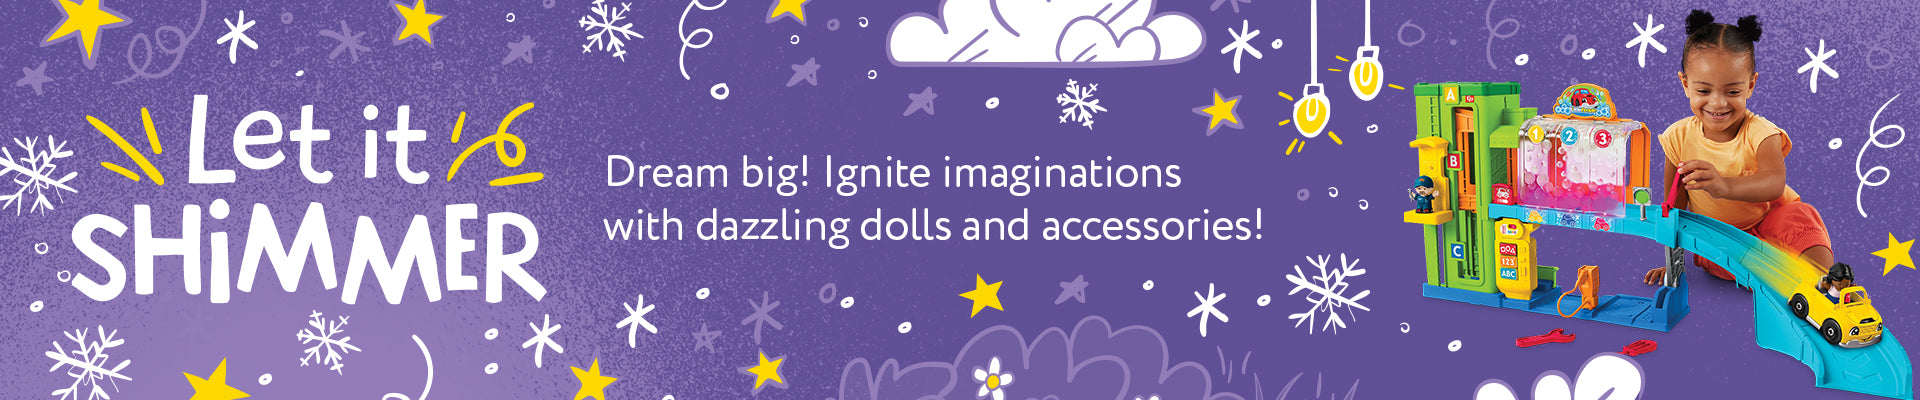 Mastermind Toys - Let it Shimmer - Dream big! Ignite imaginations with dazzling dolls and accessories!